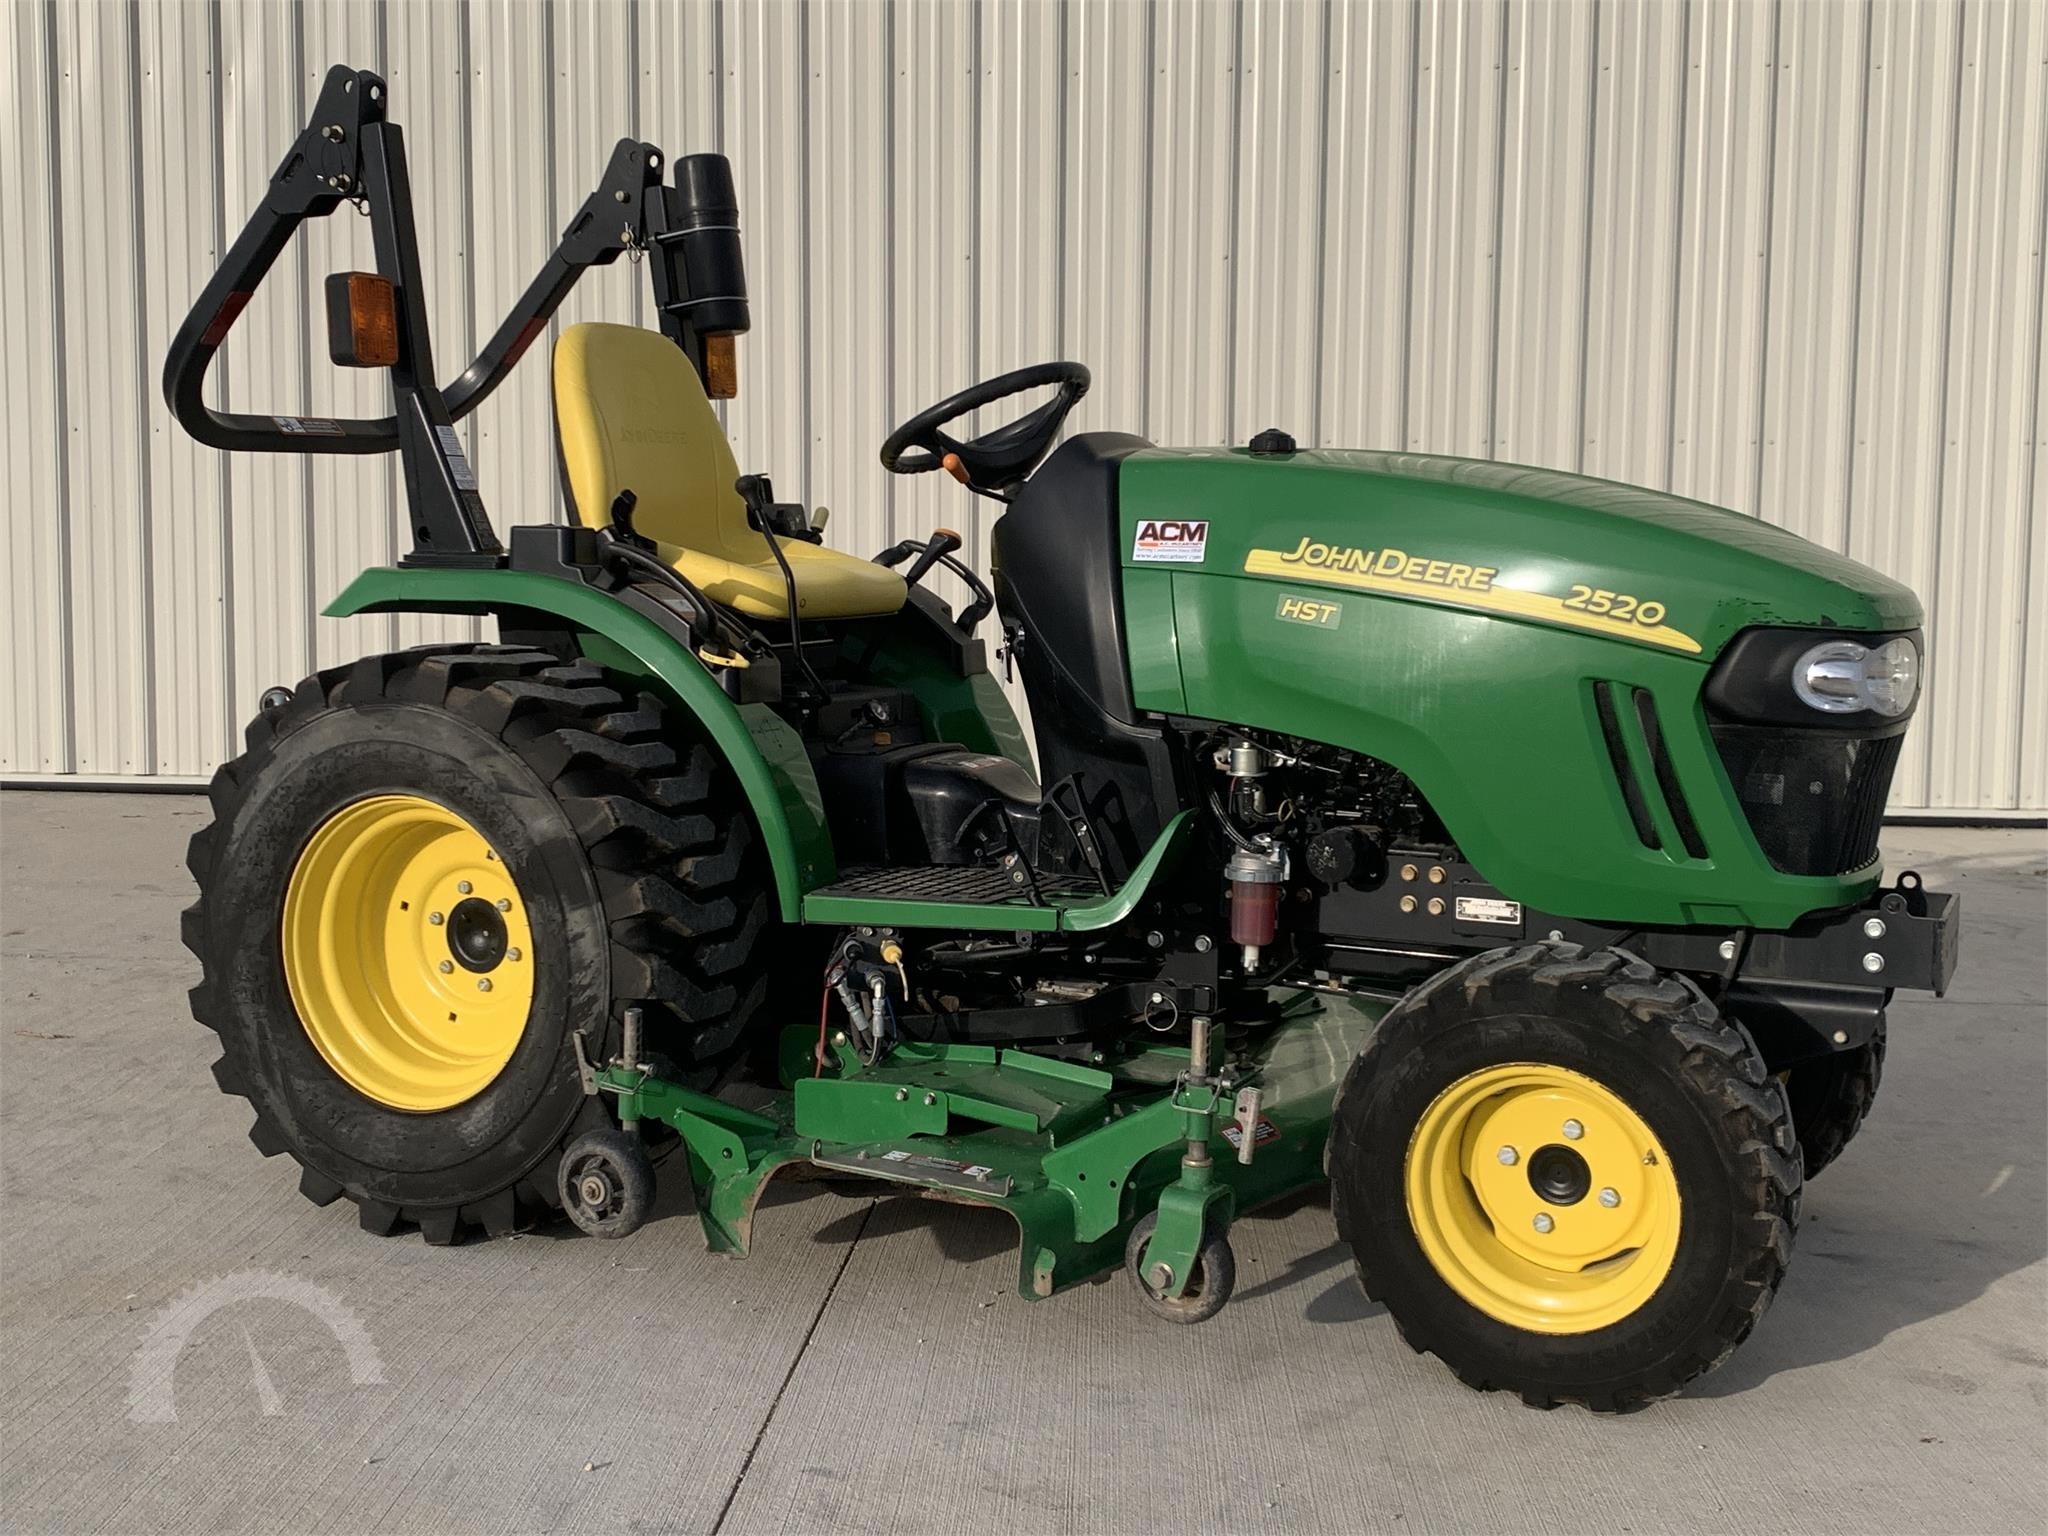 Used New Holland Tractors for Sale - 2529 Listings